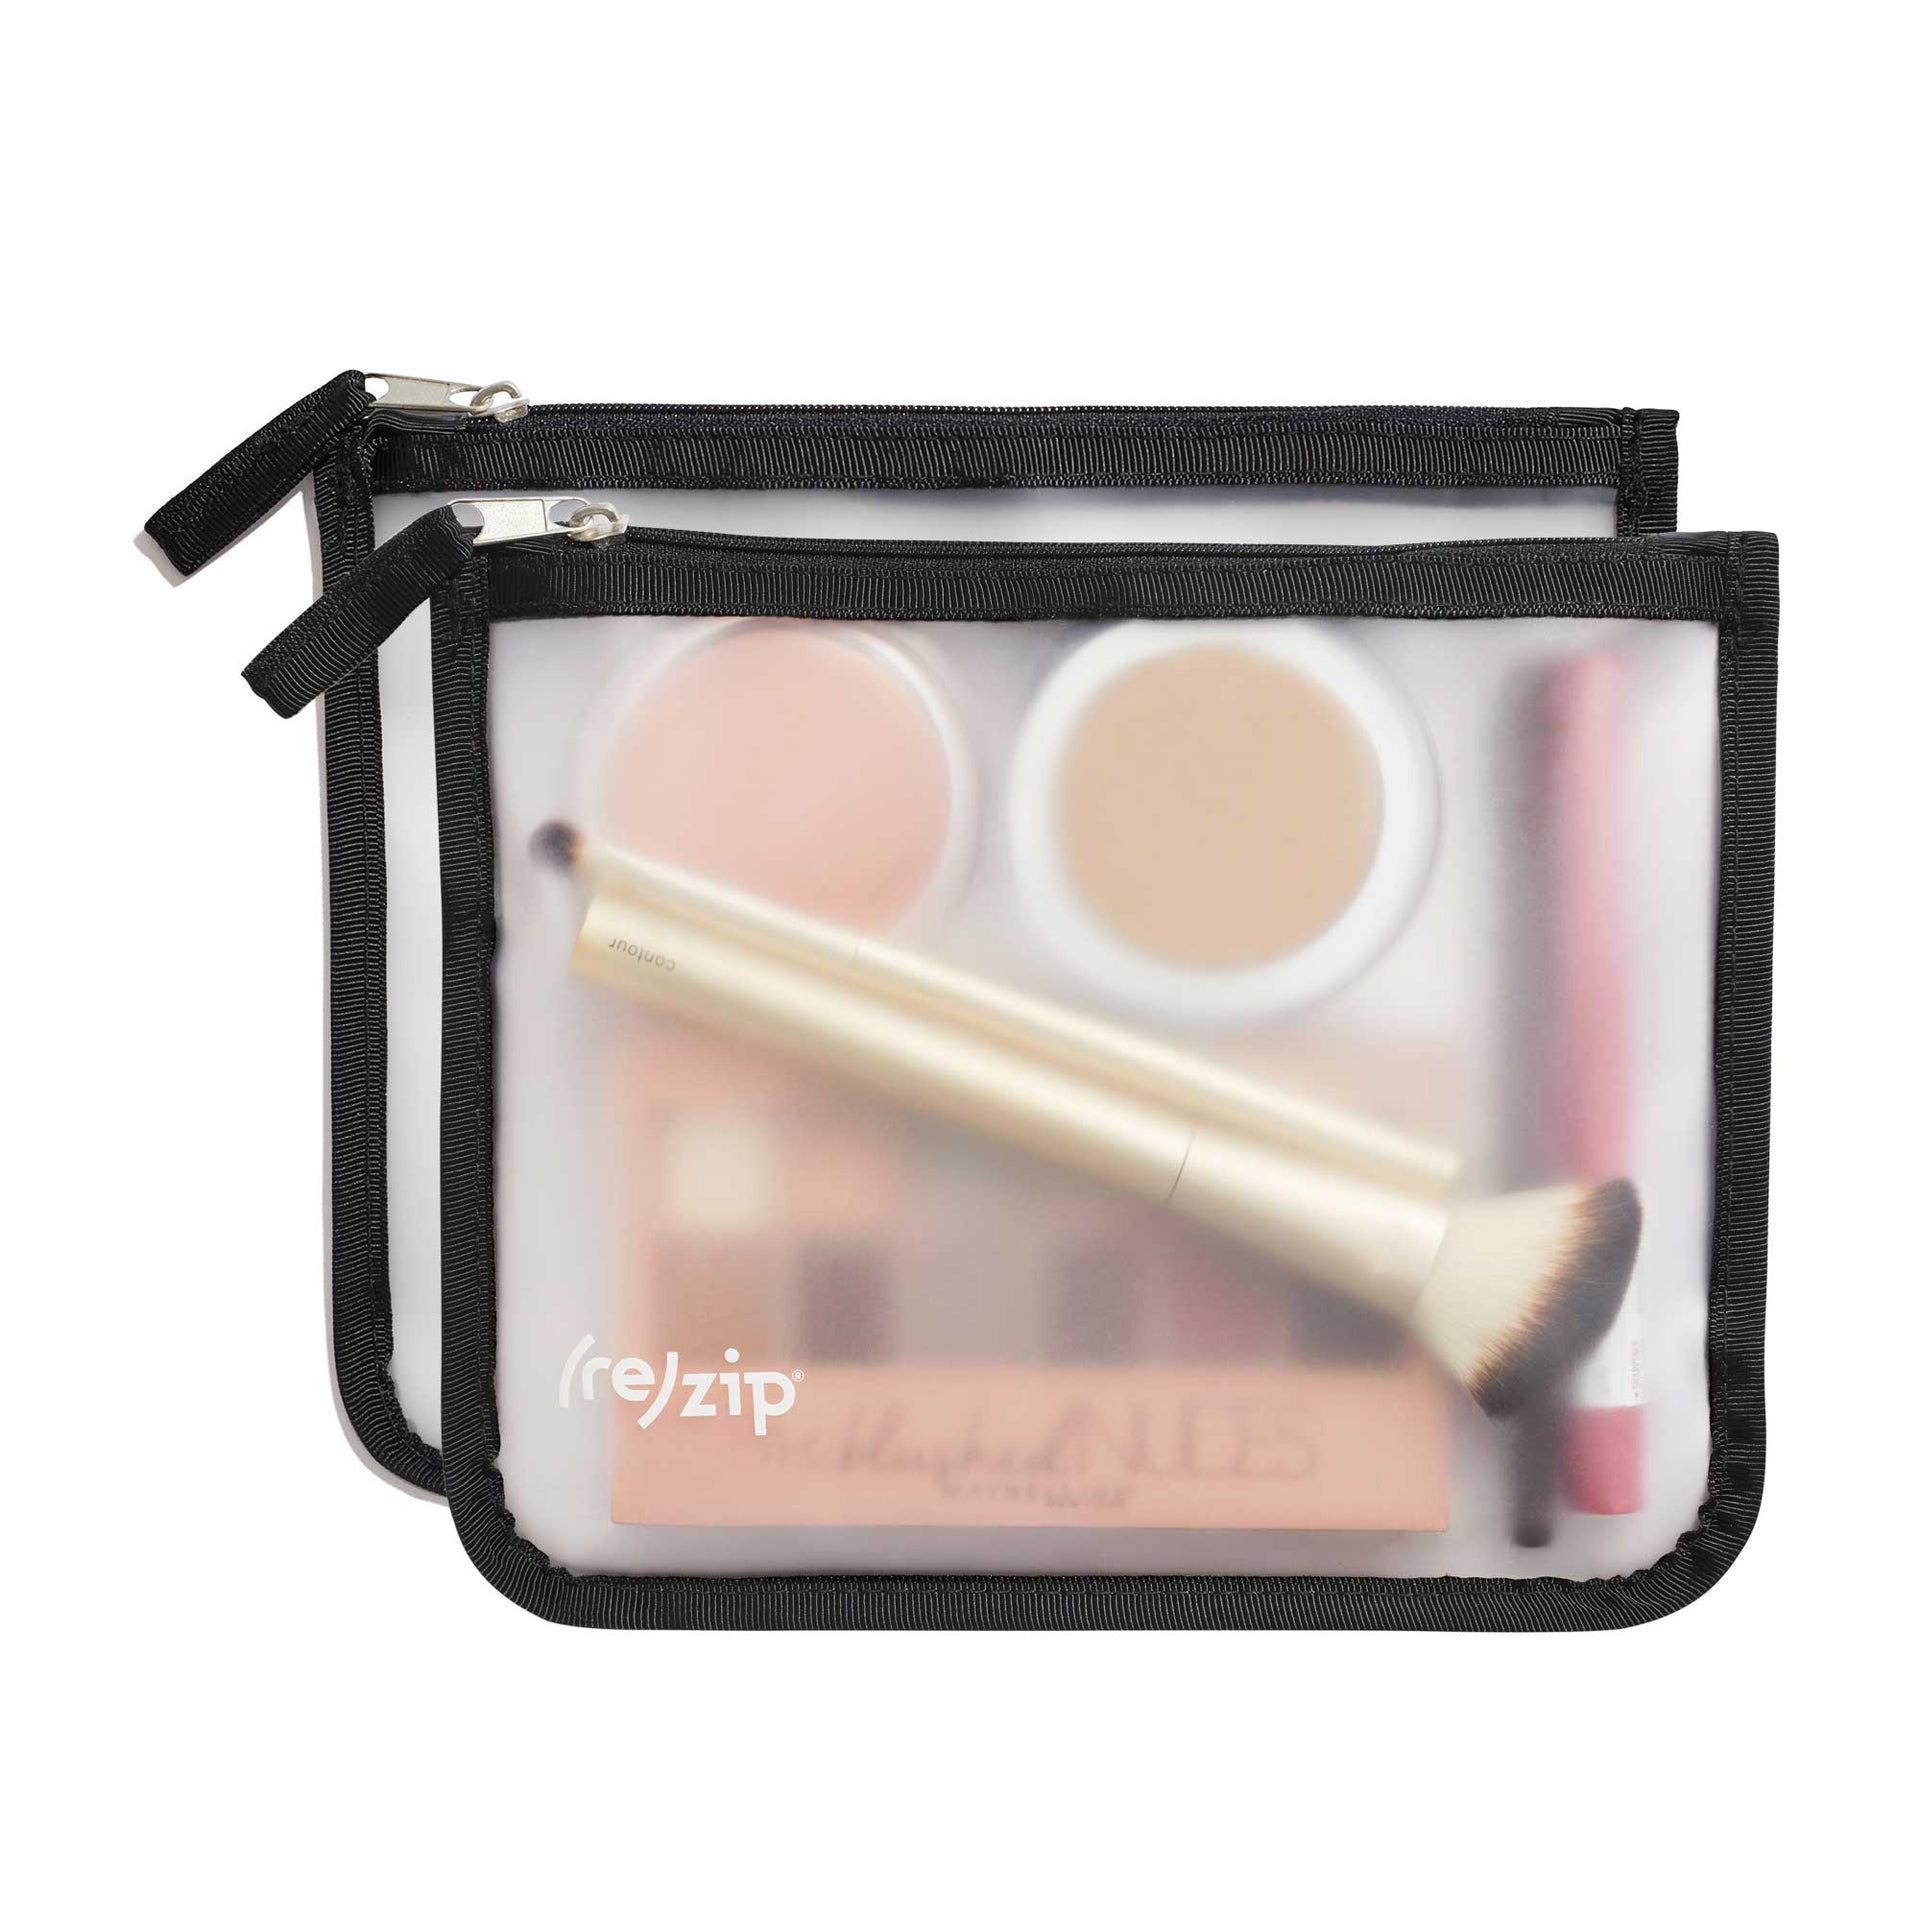 zippered medium bag great for makeup and on the go